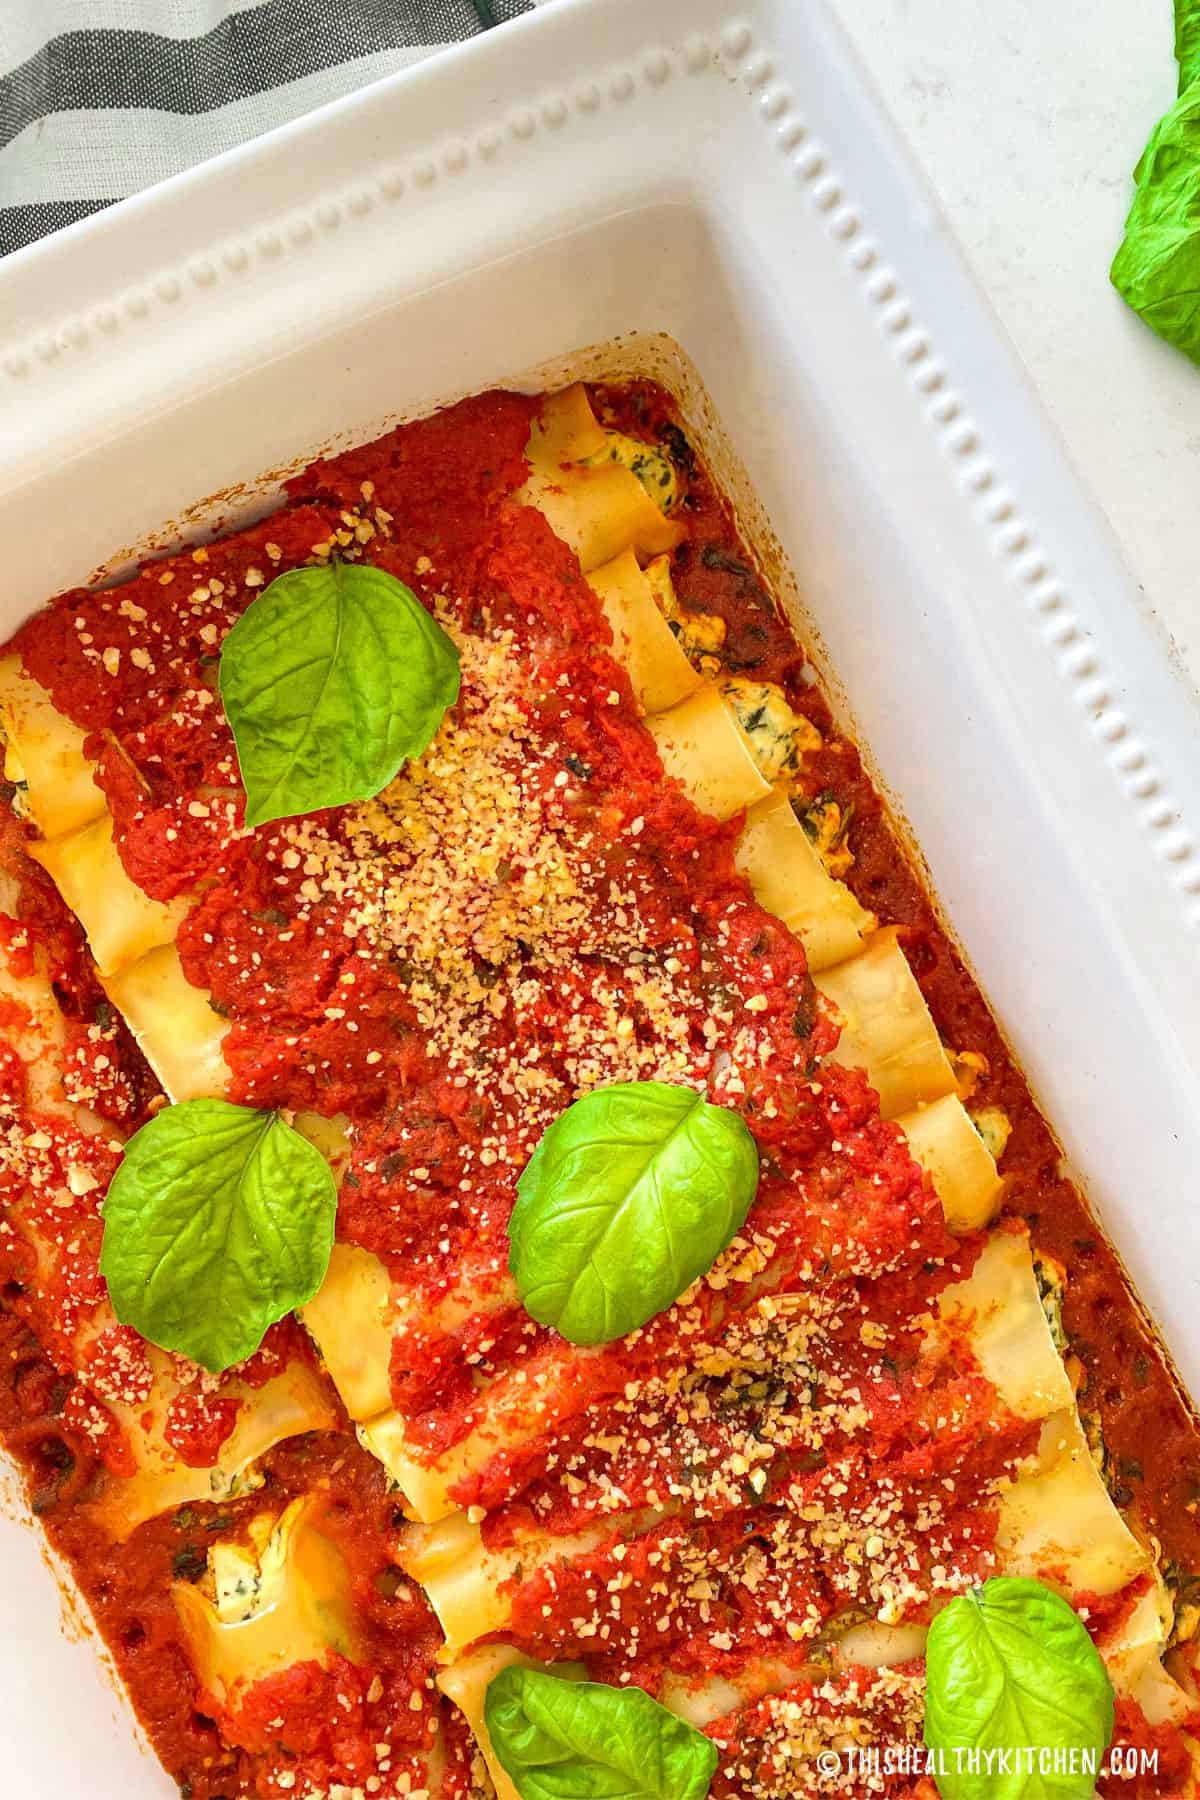 Baking dish with cooked vegan cannelloni inside and basil leaves on top.